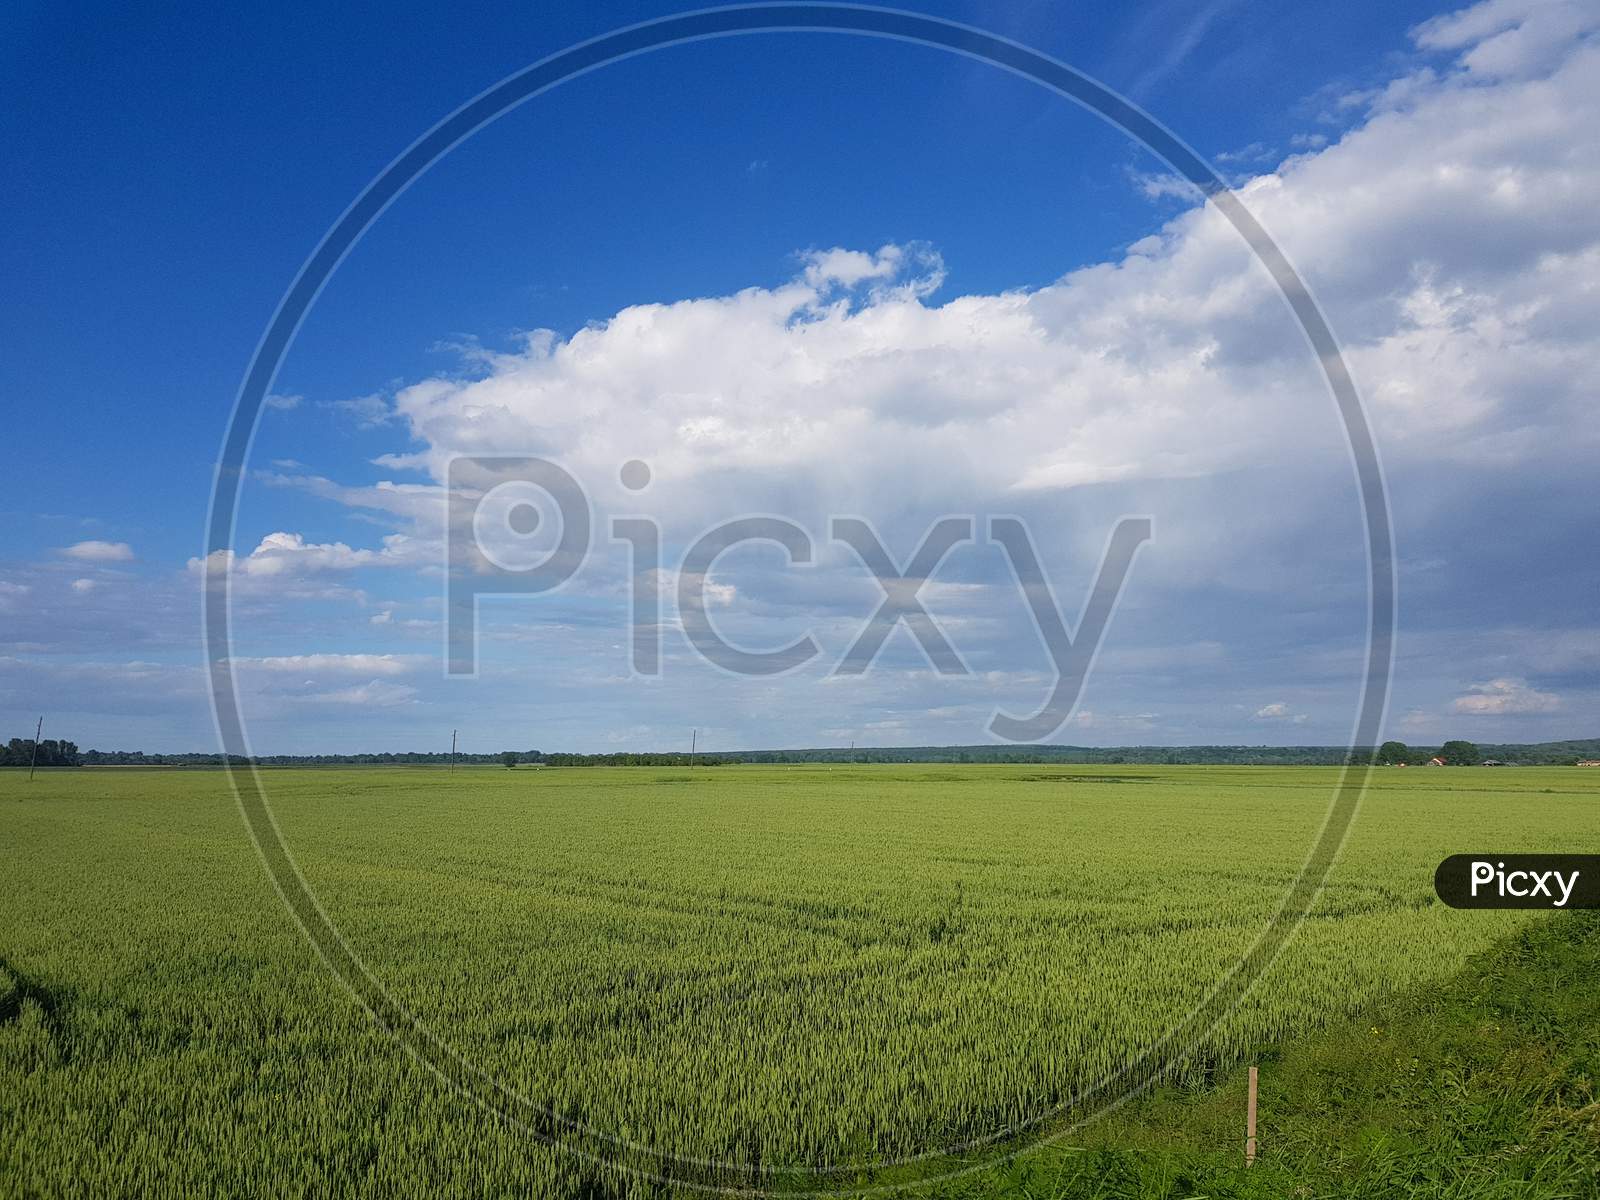 Beautiful Scenery Of A Green Grassy Land Under A Cloudy Sky